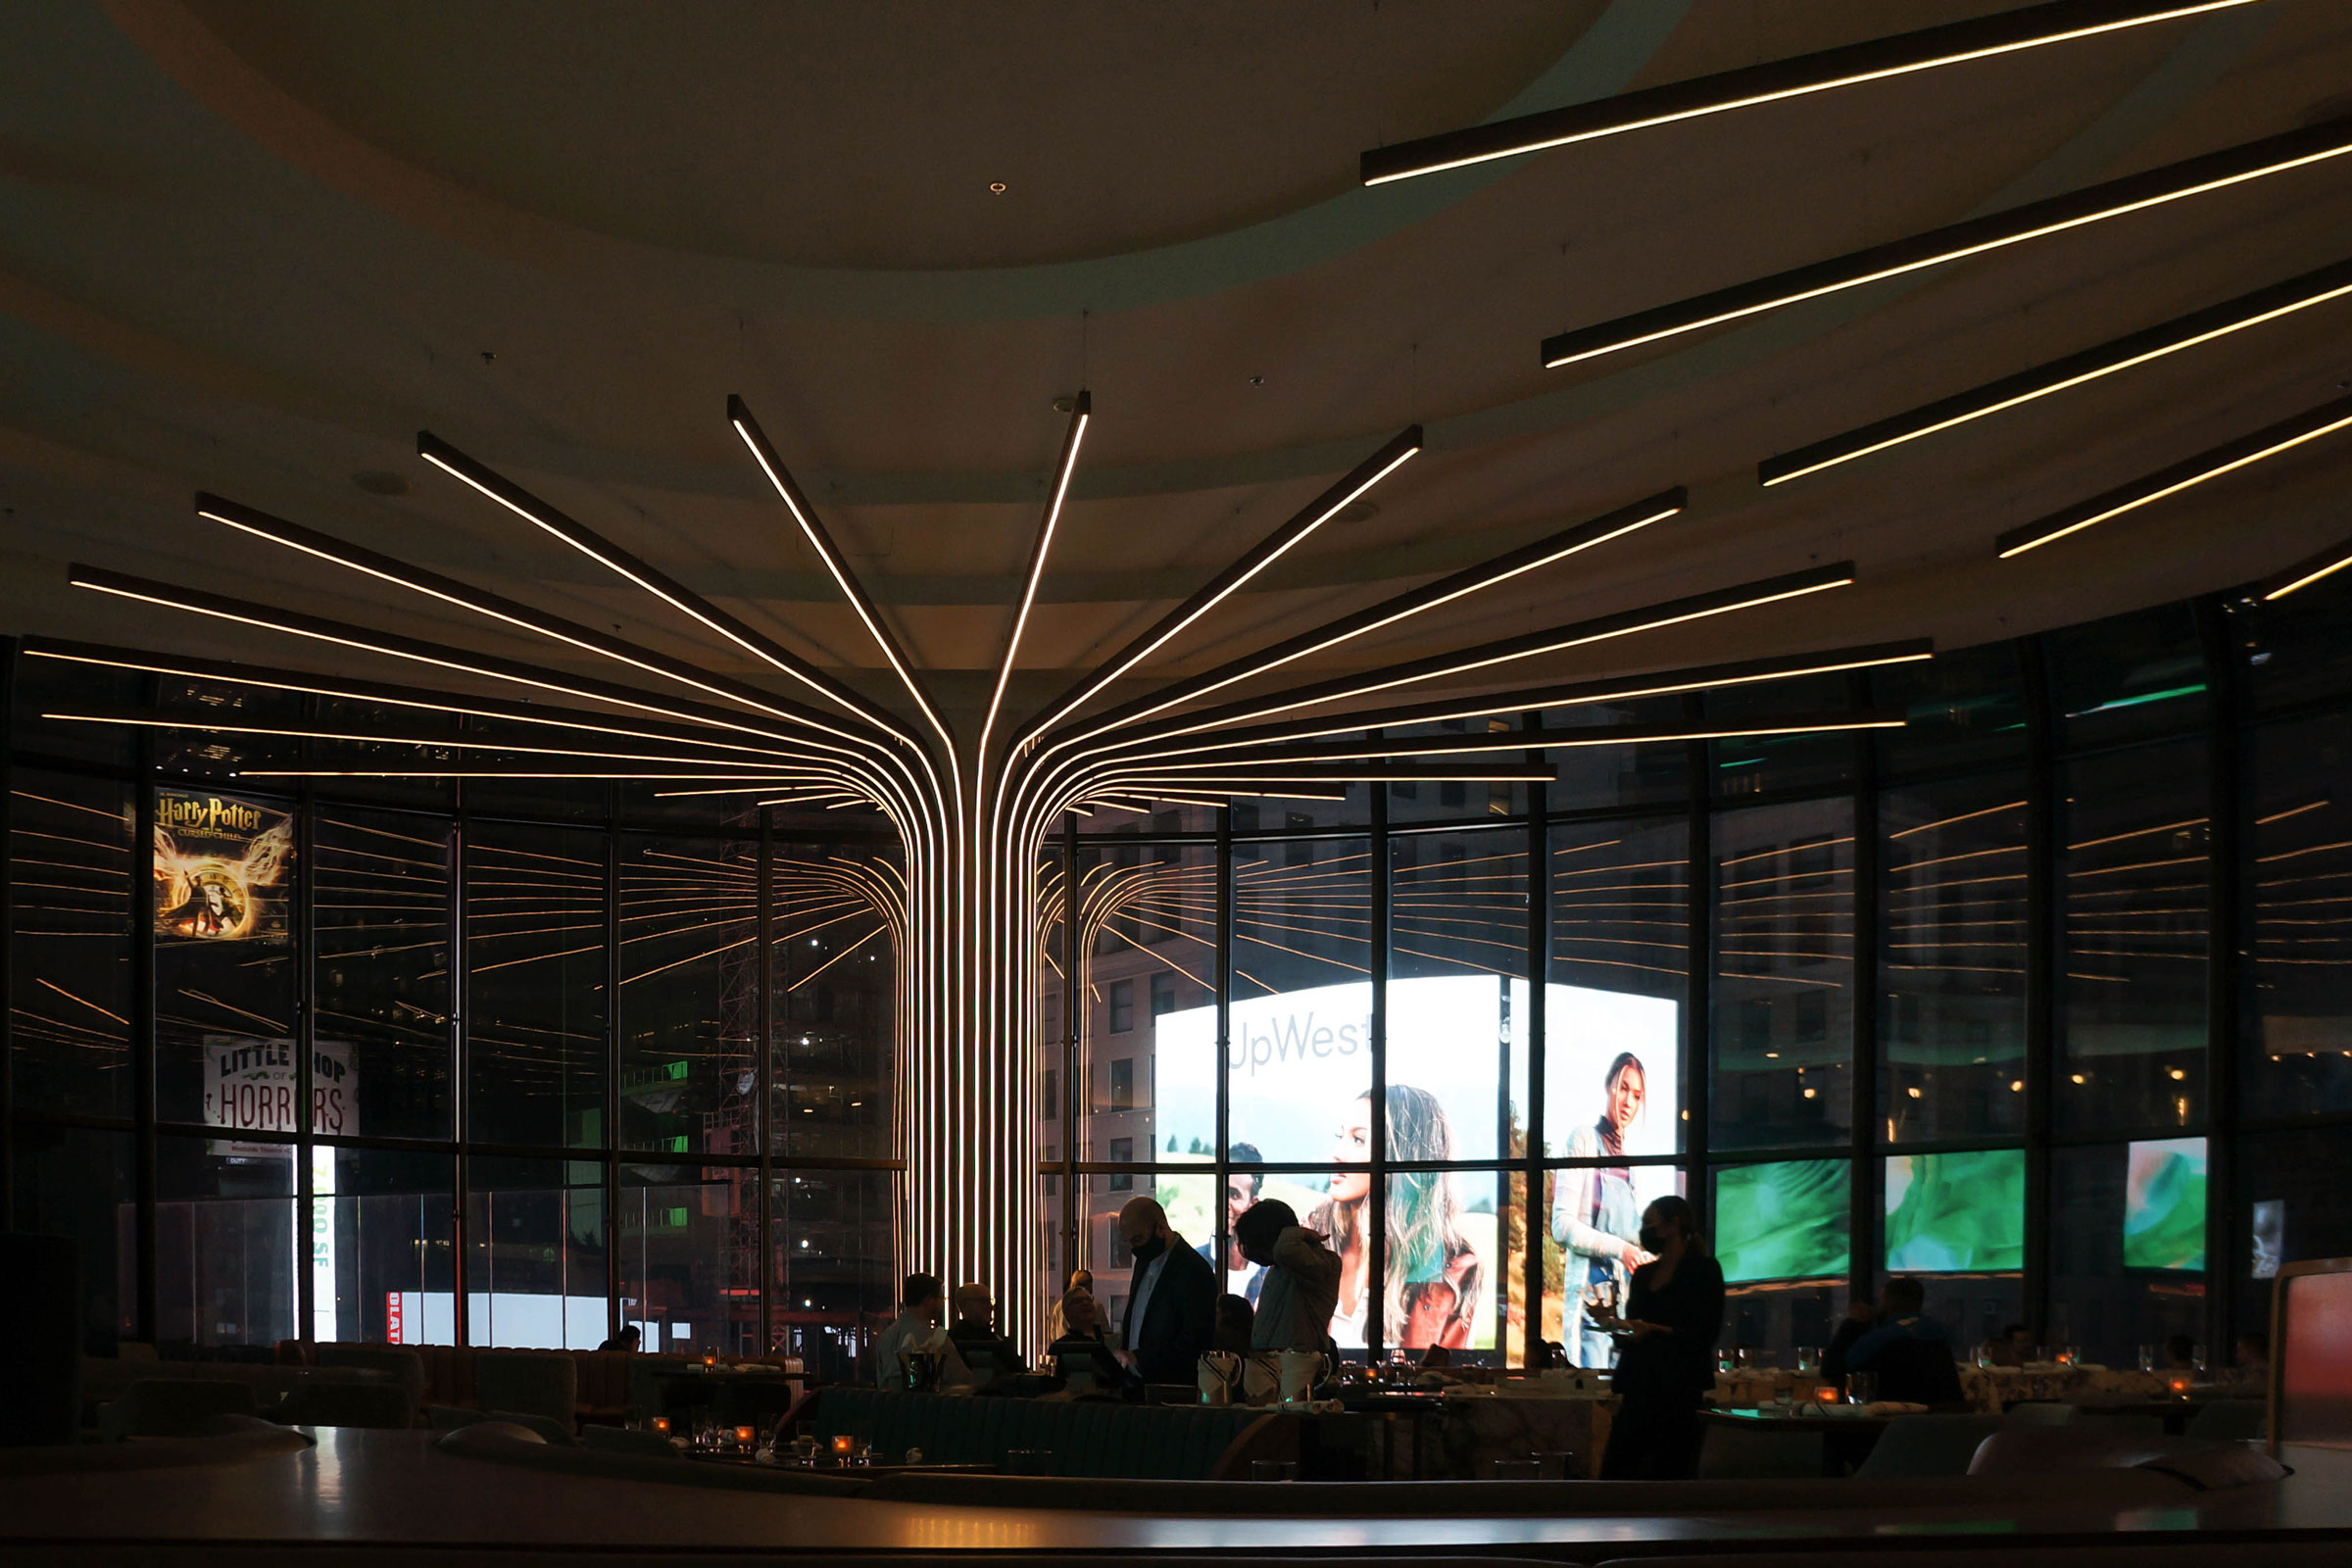 Linear LED Lights Add Stunning Visual Element to Broadway Lounge